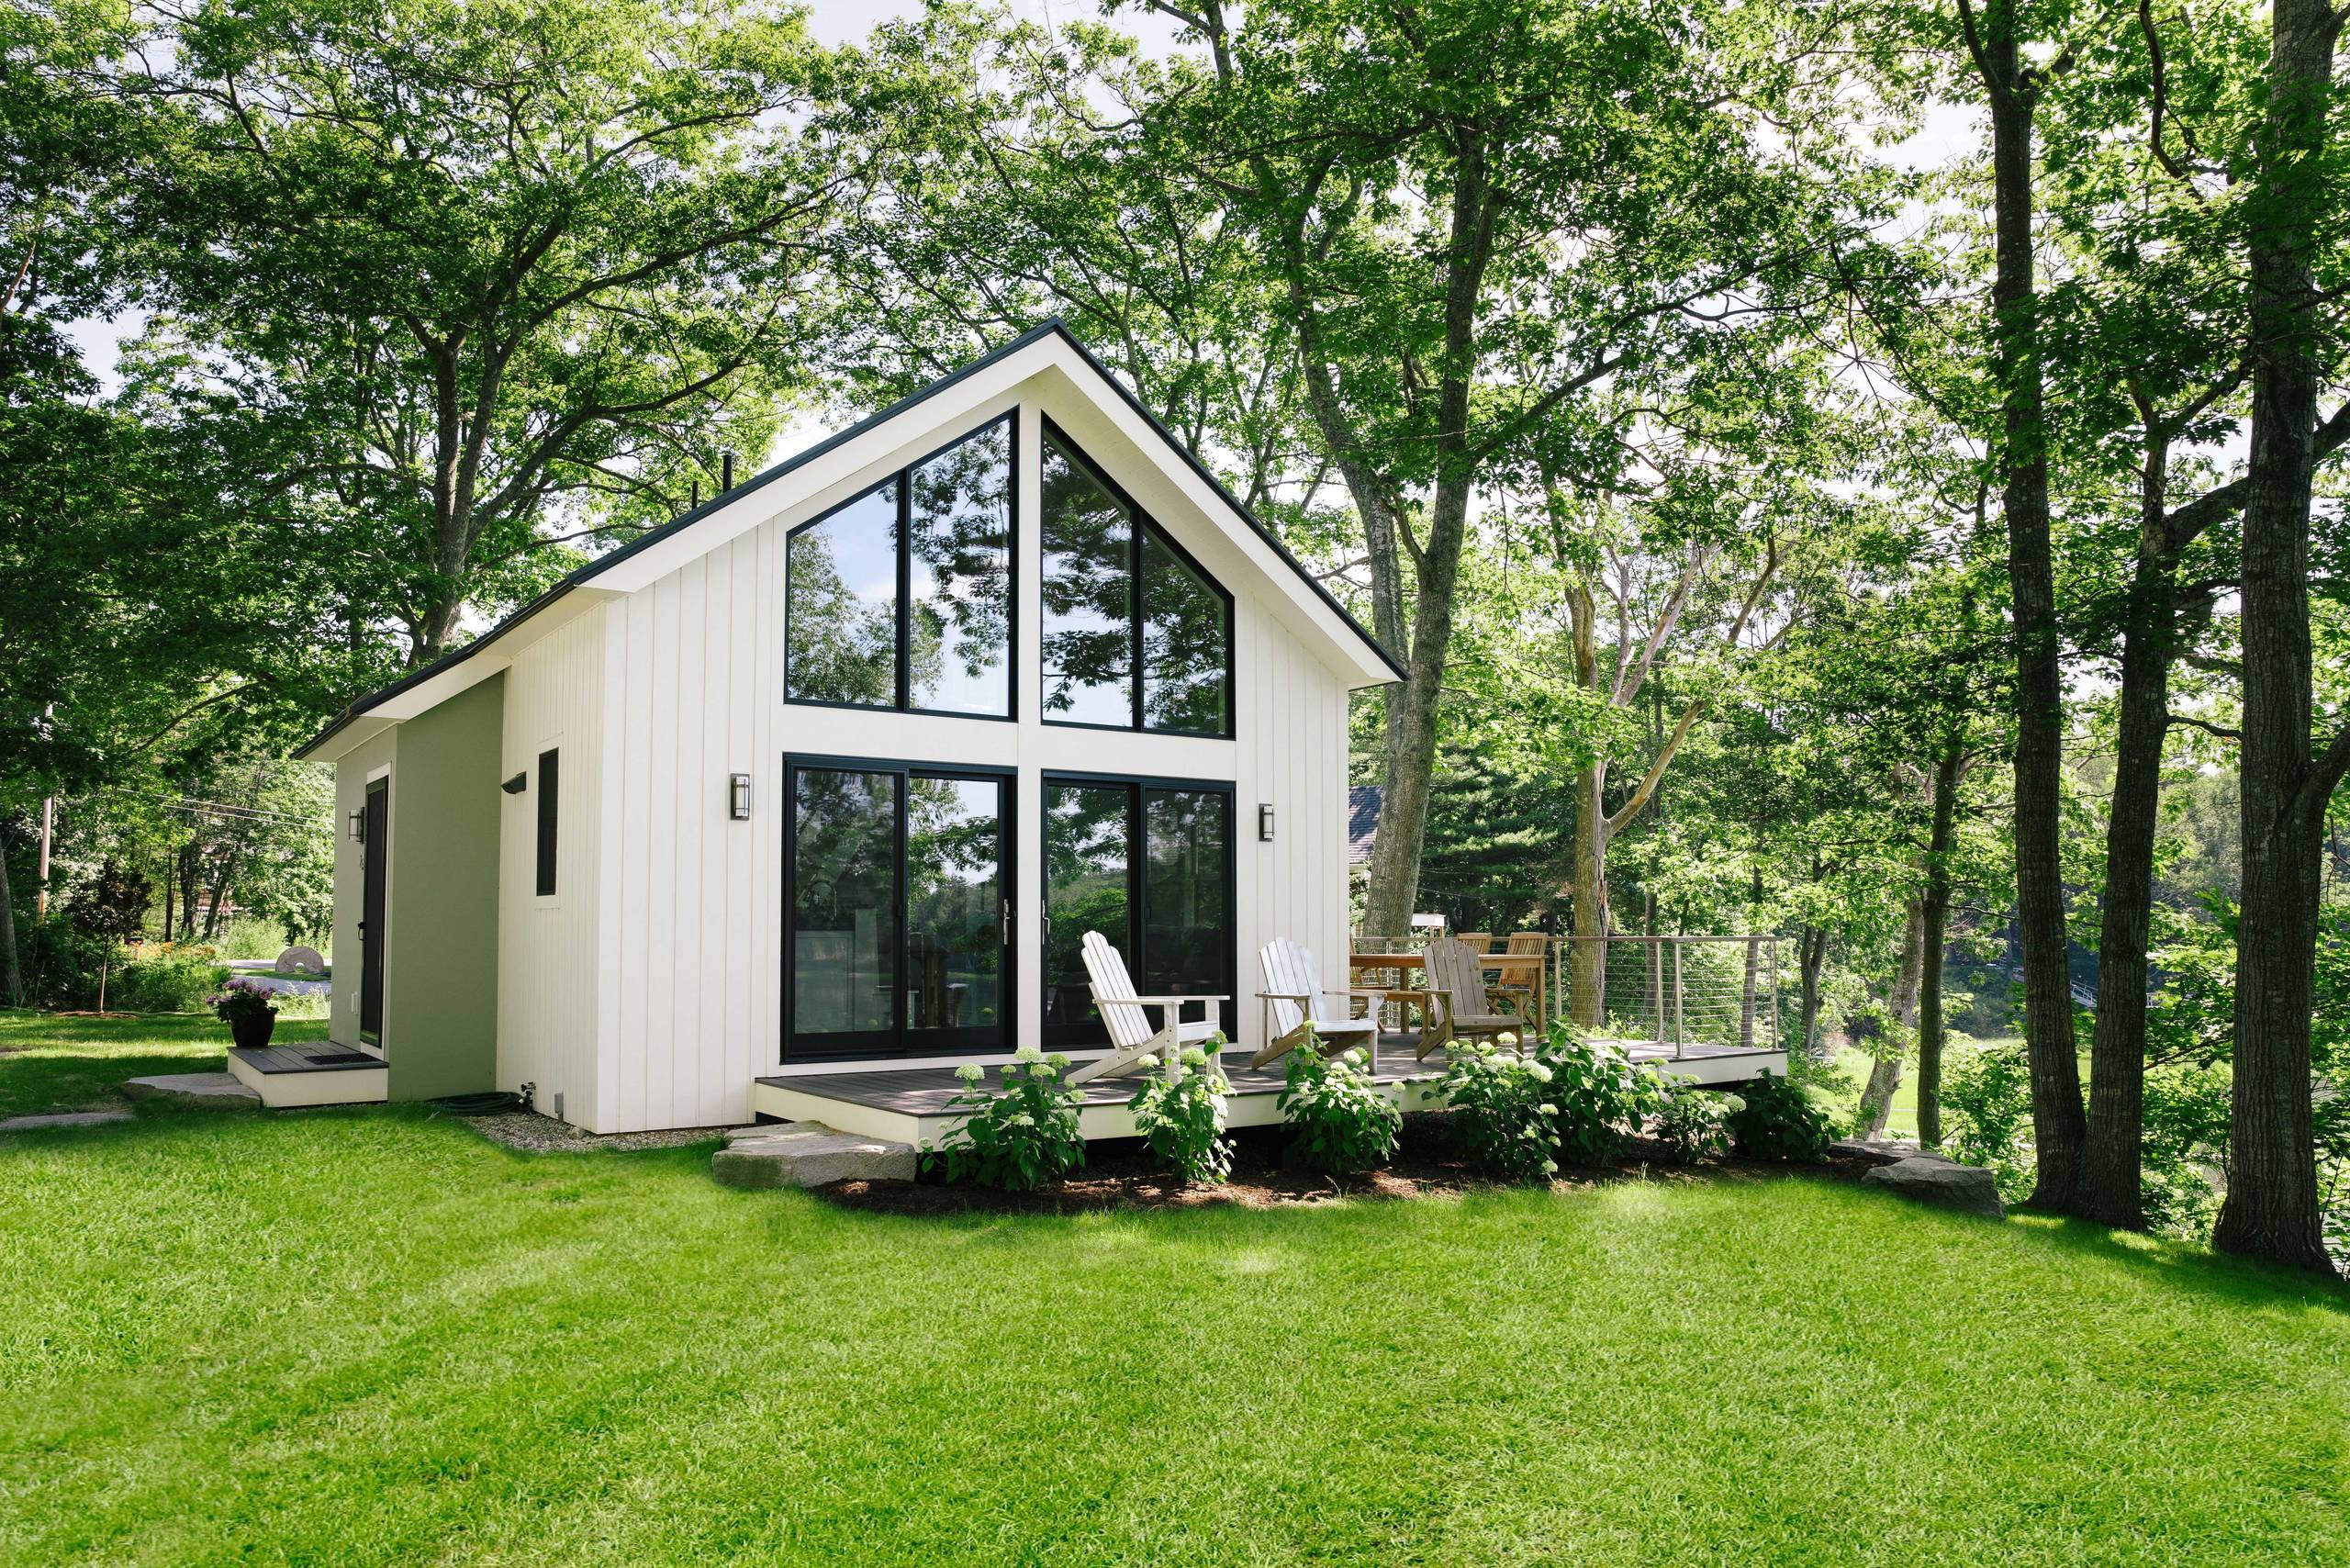 Tiny house but impressive curb appeal (from Houzz)